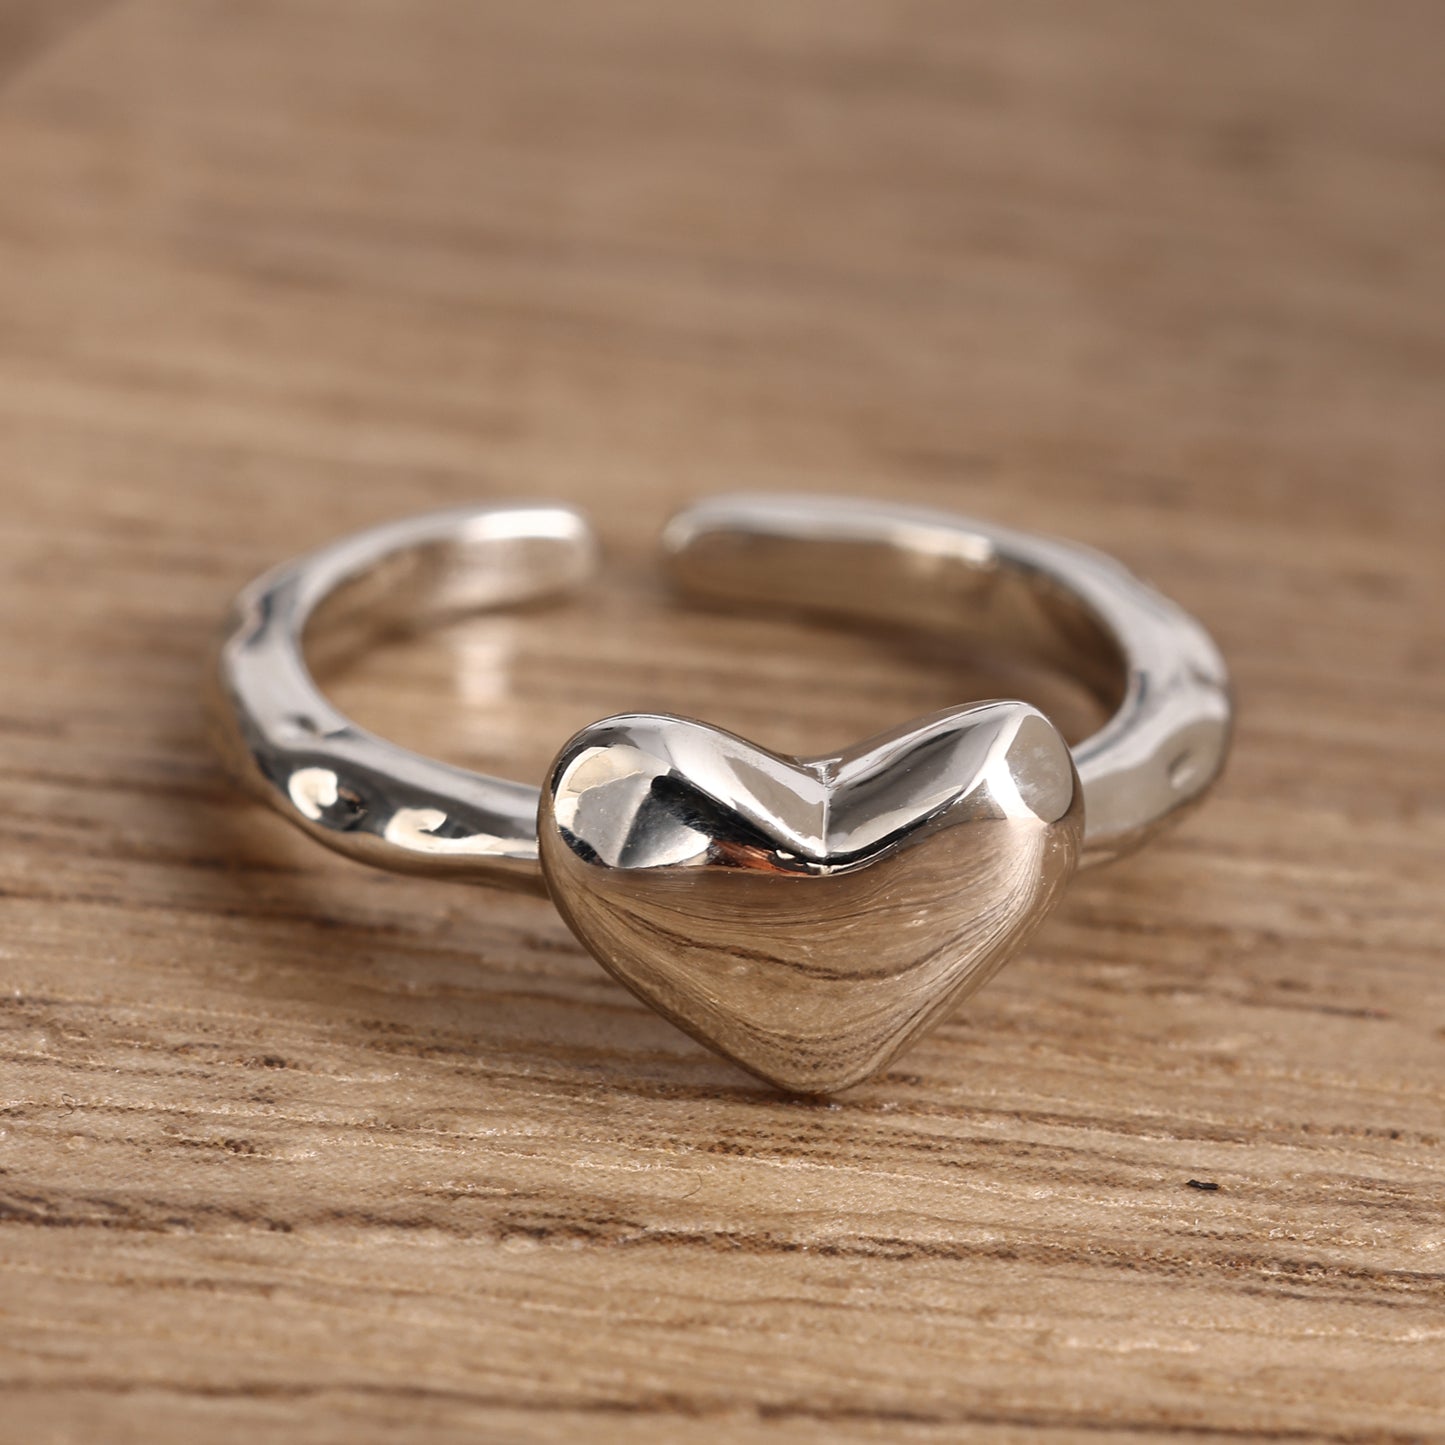 Wholesale Sweet Heart Shape Copper Plating 18k Gold Plated Open Rings